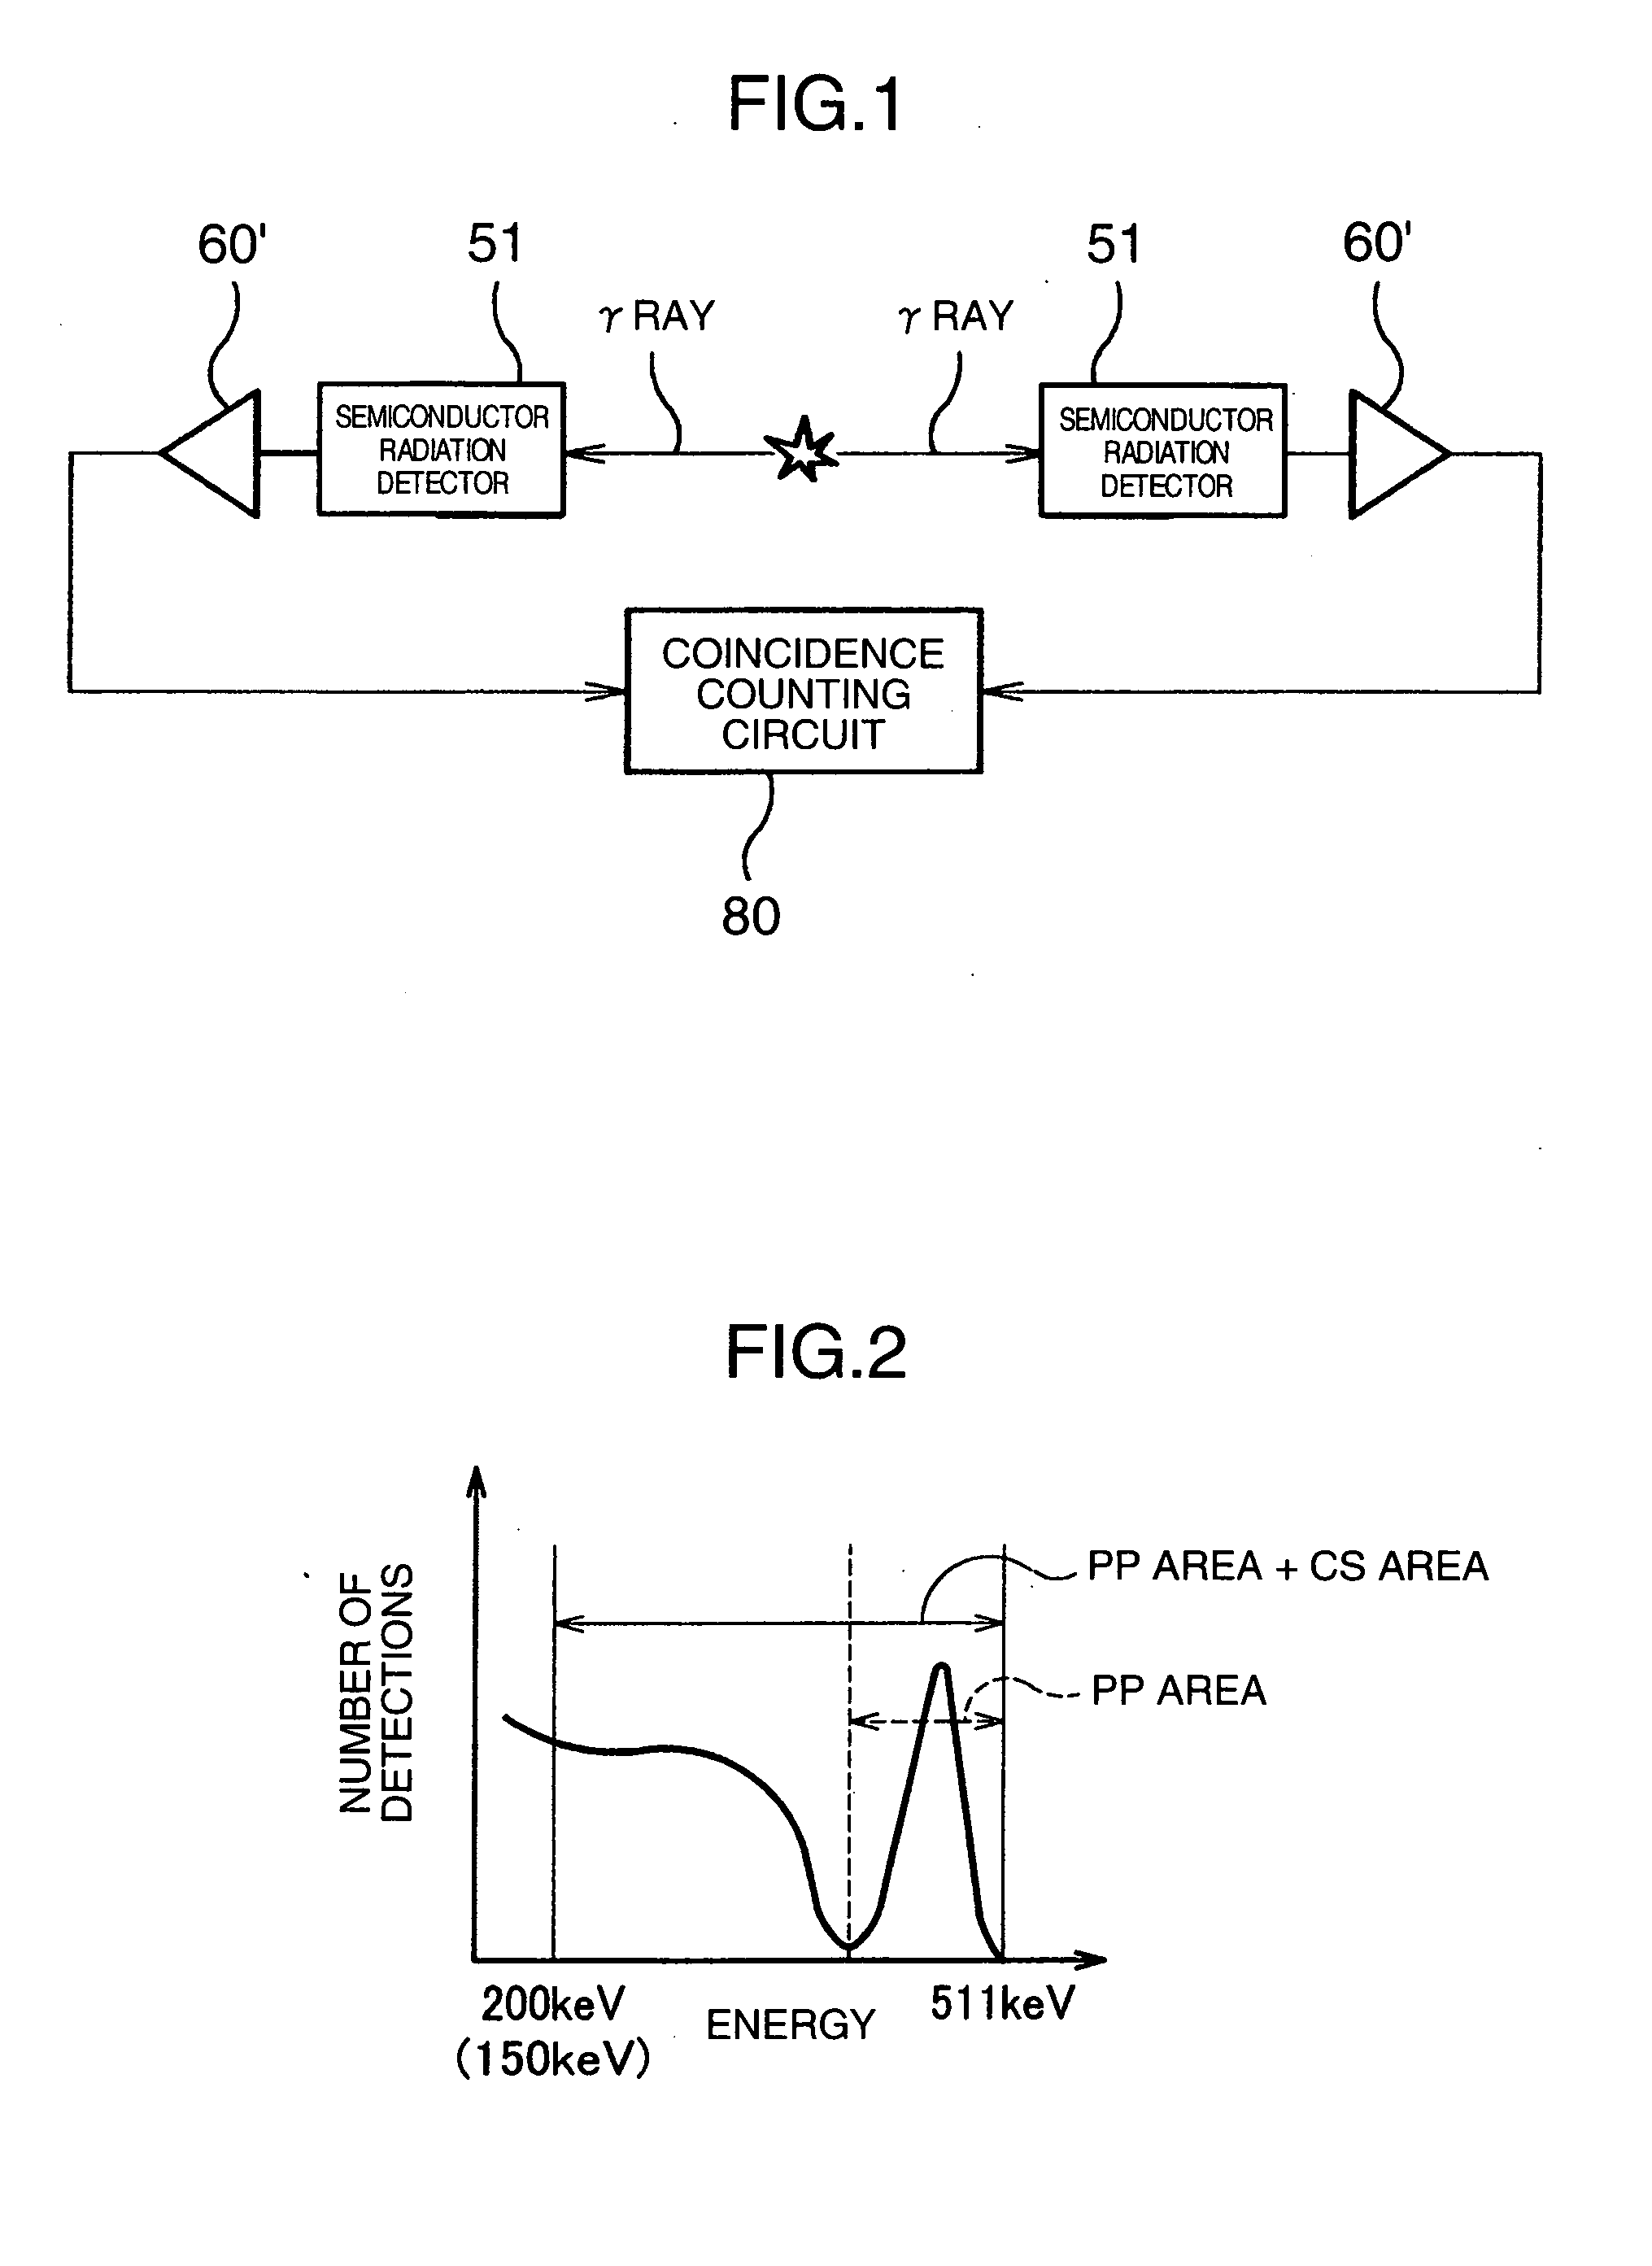 Coincidence counting method of gamma ray and nuclear medicine diagnostic apparatus